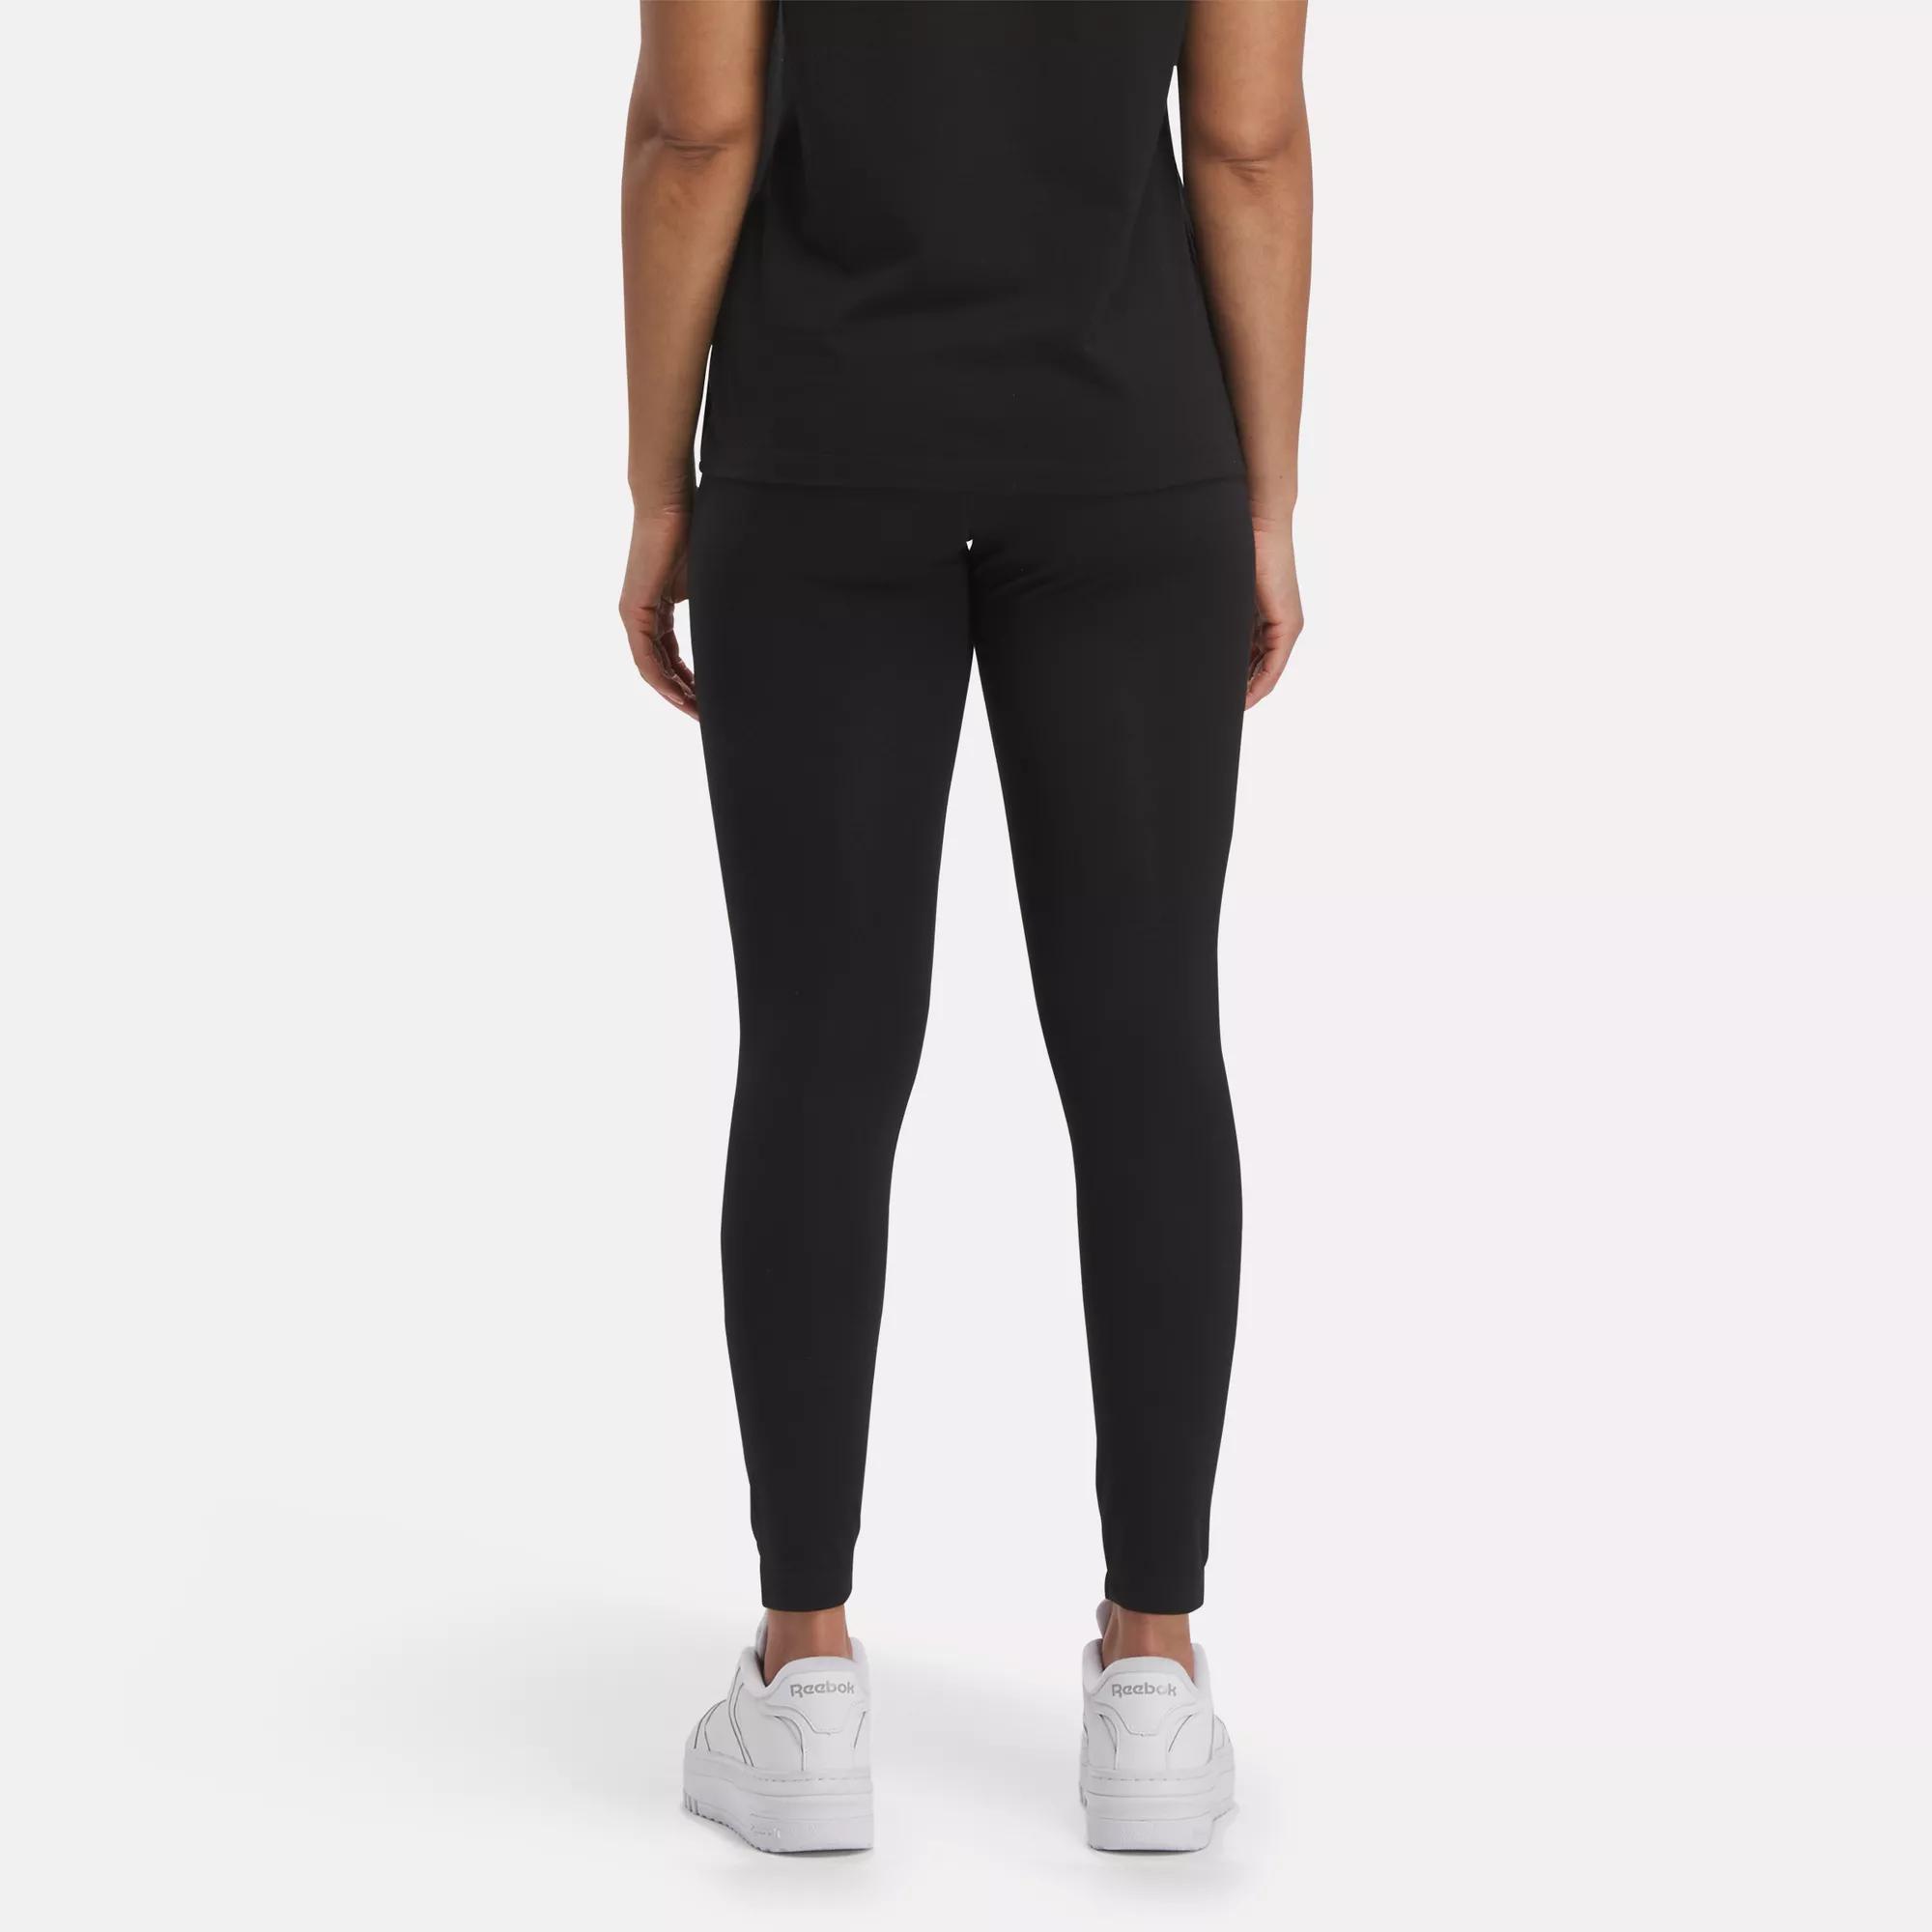 Reebok size small leggings - $18 New With Tags - From Thrifty